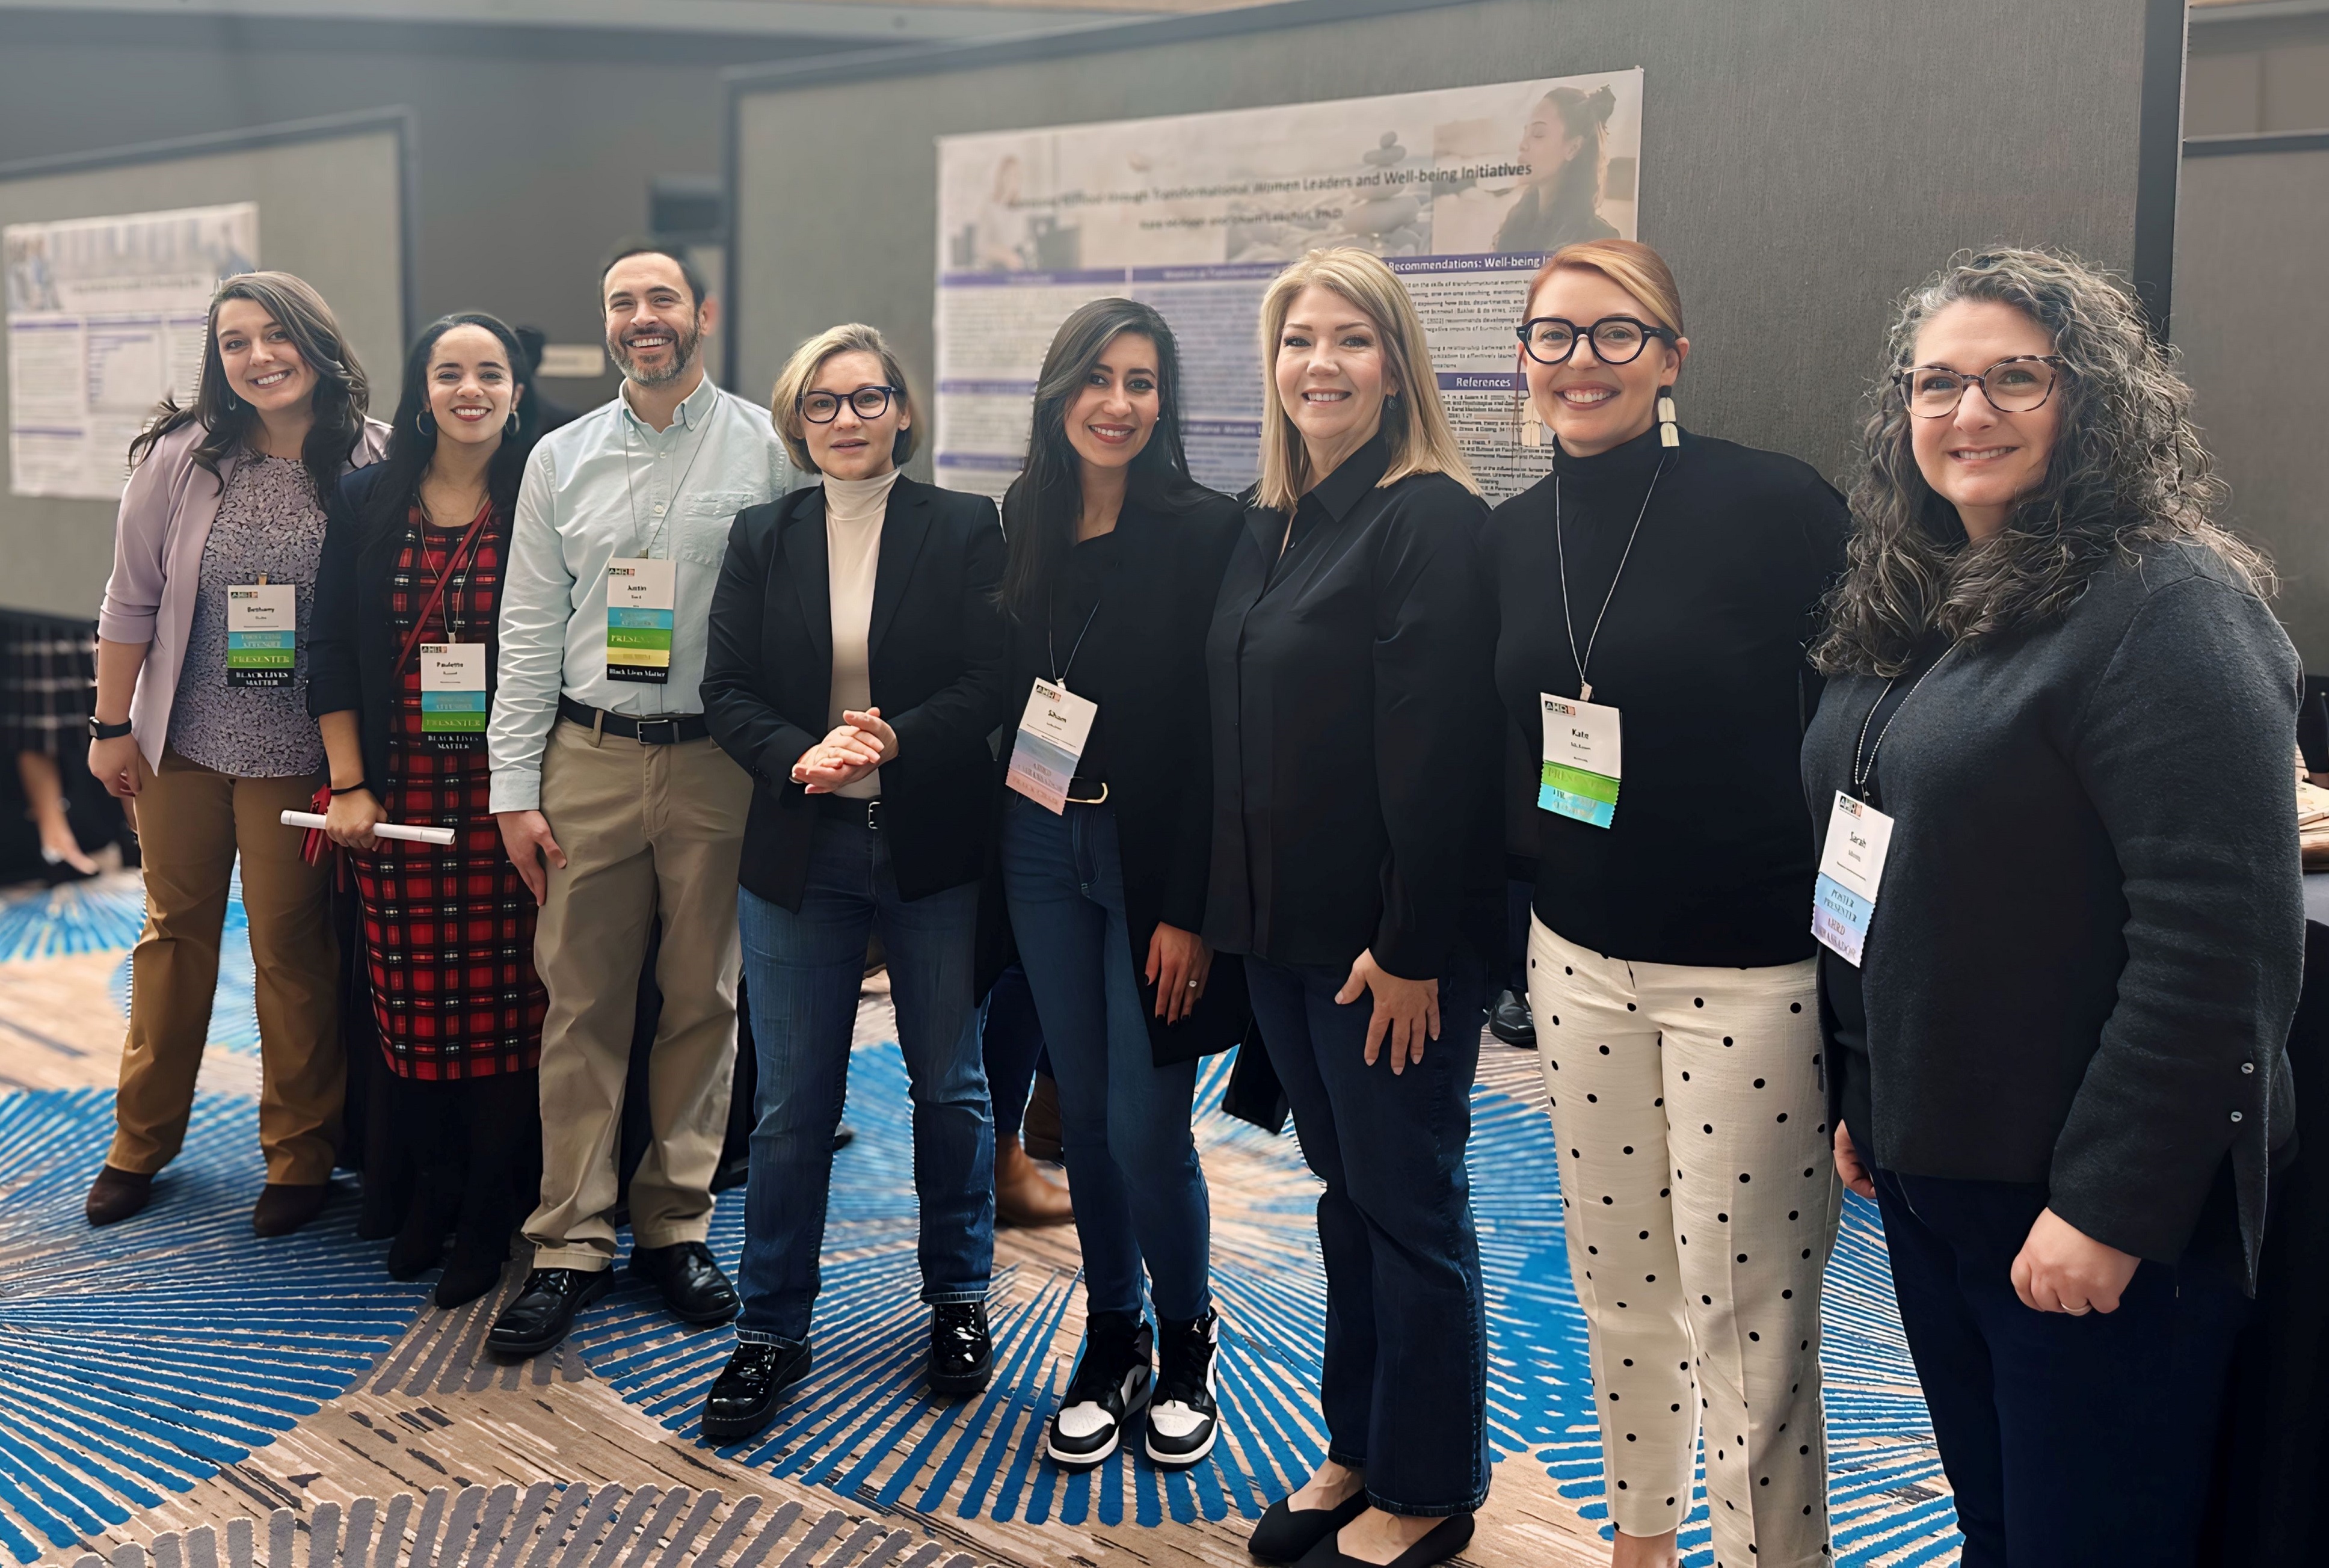 From L-R: MSHR Students Bethany Duke, Paulette Russell,Justin Slack; Dr. Marie-Line Germain, Professor; Dr. Siham Lekchiri, Professor; MSHR students Cahterine Harkins and Kate McKeen; and Dr. Sarah Minnis, ProfessorMSHR student; Dr. Faculty and MSHR Students representing their research at the Academy of Human Resources Development Conference February 2024